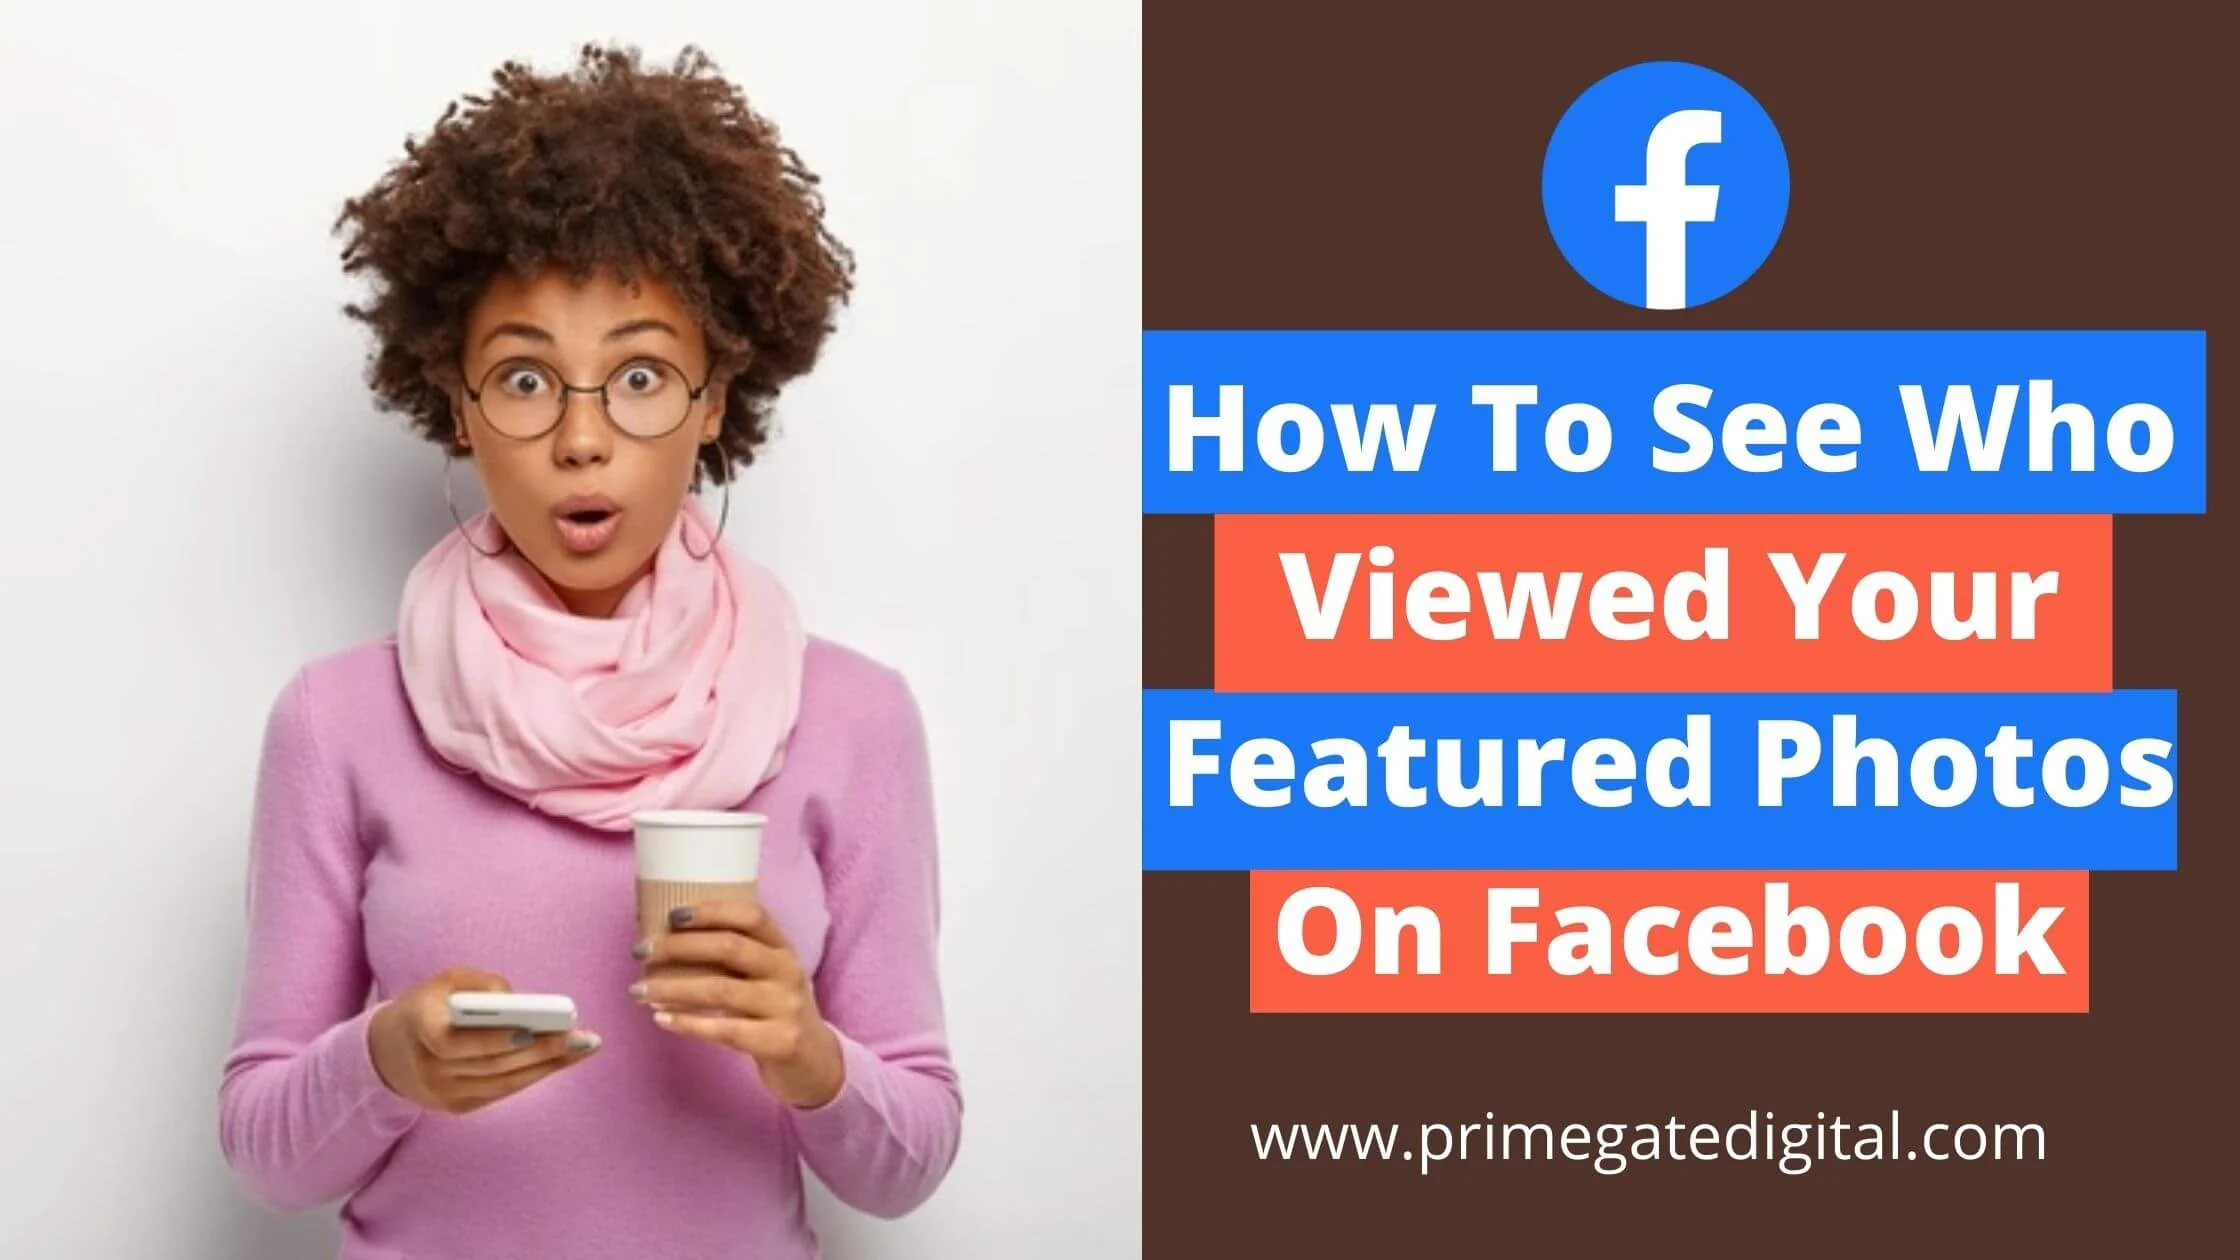 How To See Who Viewed Your Featured Photos On Facebook